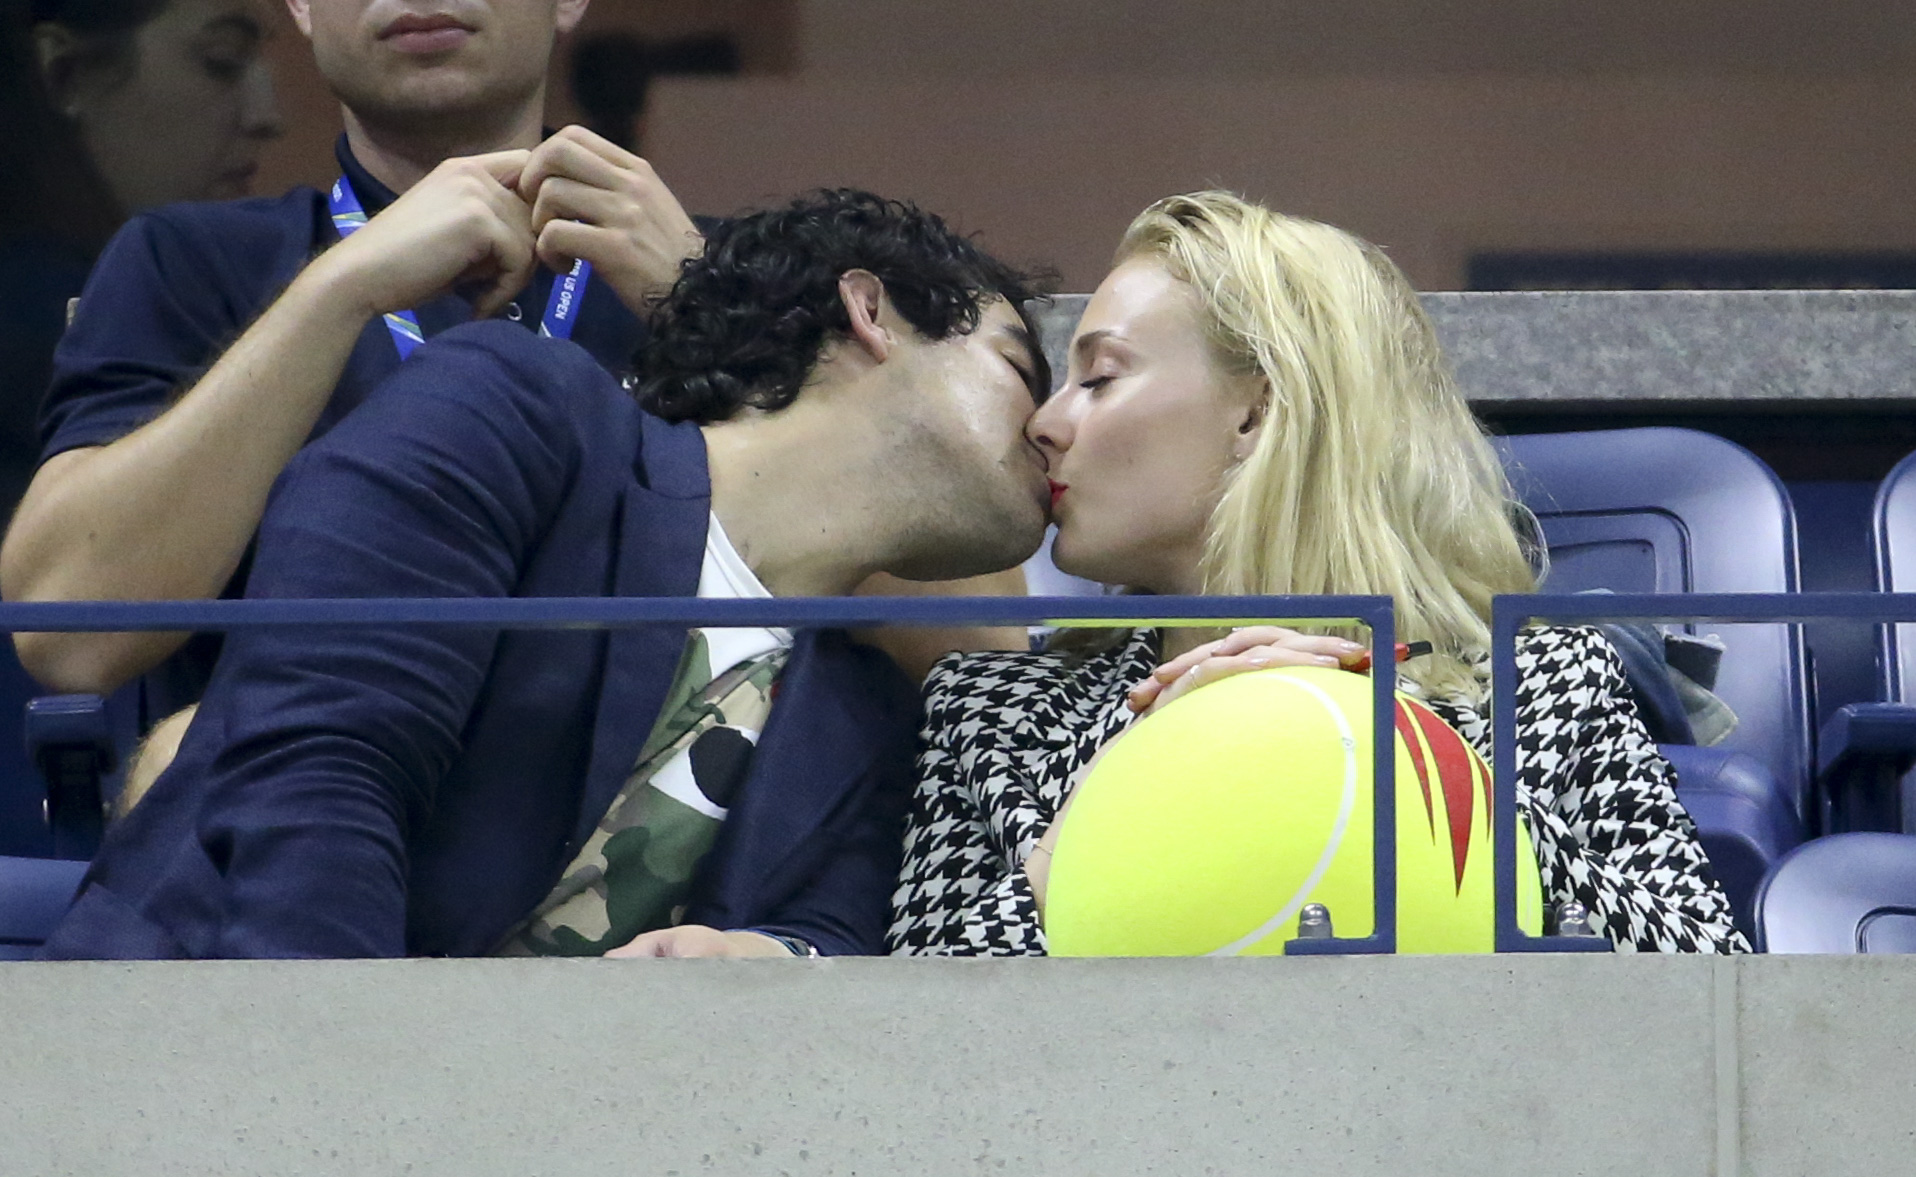 Joe Jonas and his girlfriend Sophie Turner attend day 8 of the 2018 tennis US Open on Arthur Ashe stadium at the USTA Billie Jean King National Tennis Center on September 3, 2018 in Flushing Meadows, Queens, New York City. (Photo by Jean Catuffe/GC Images) (Jean Catuffe—GC Images)